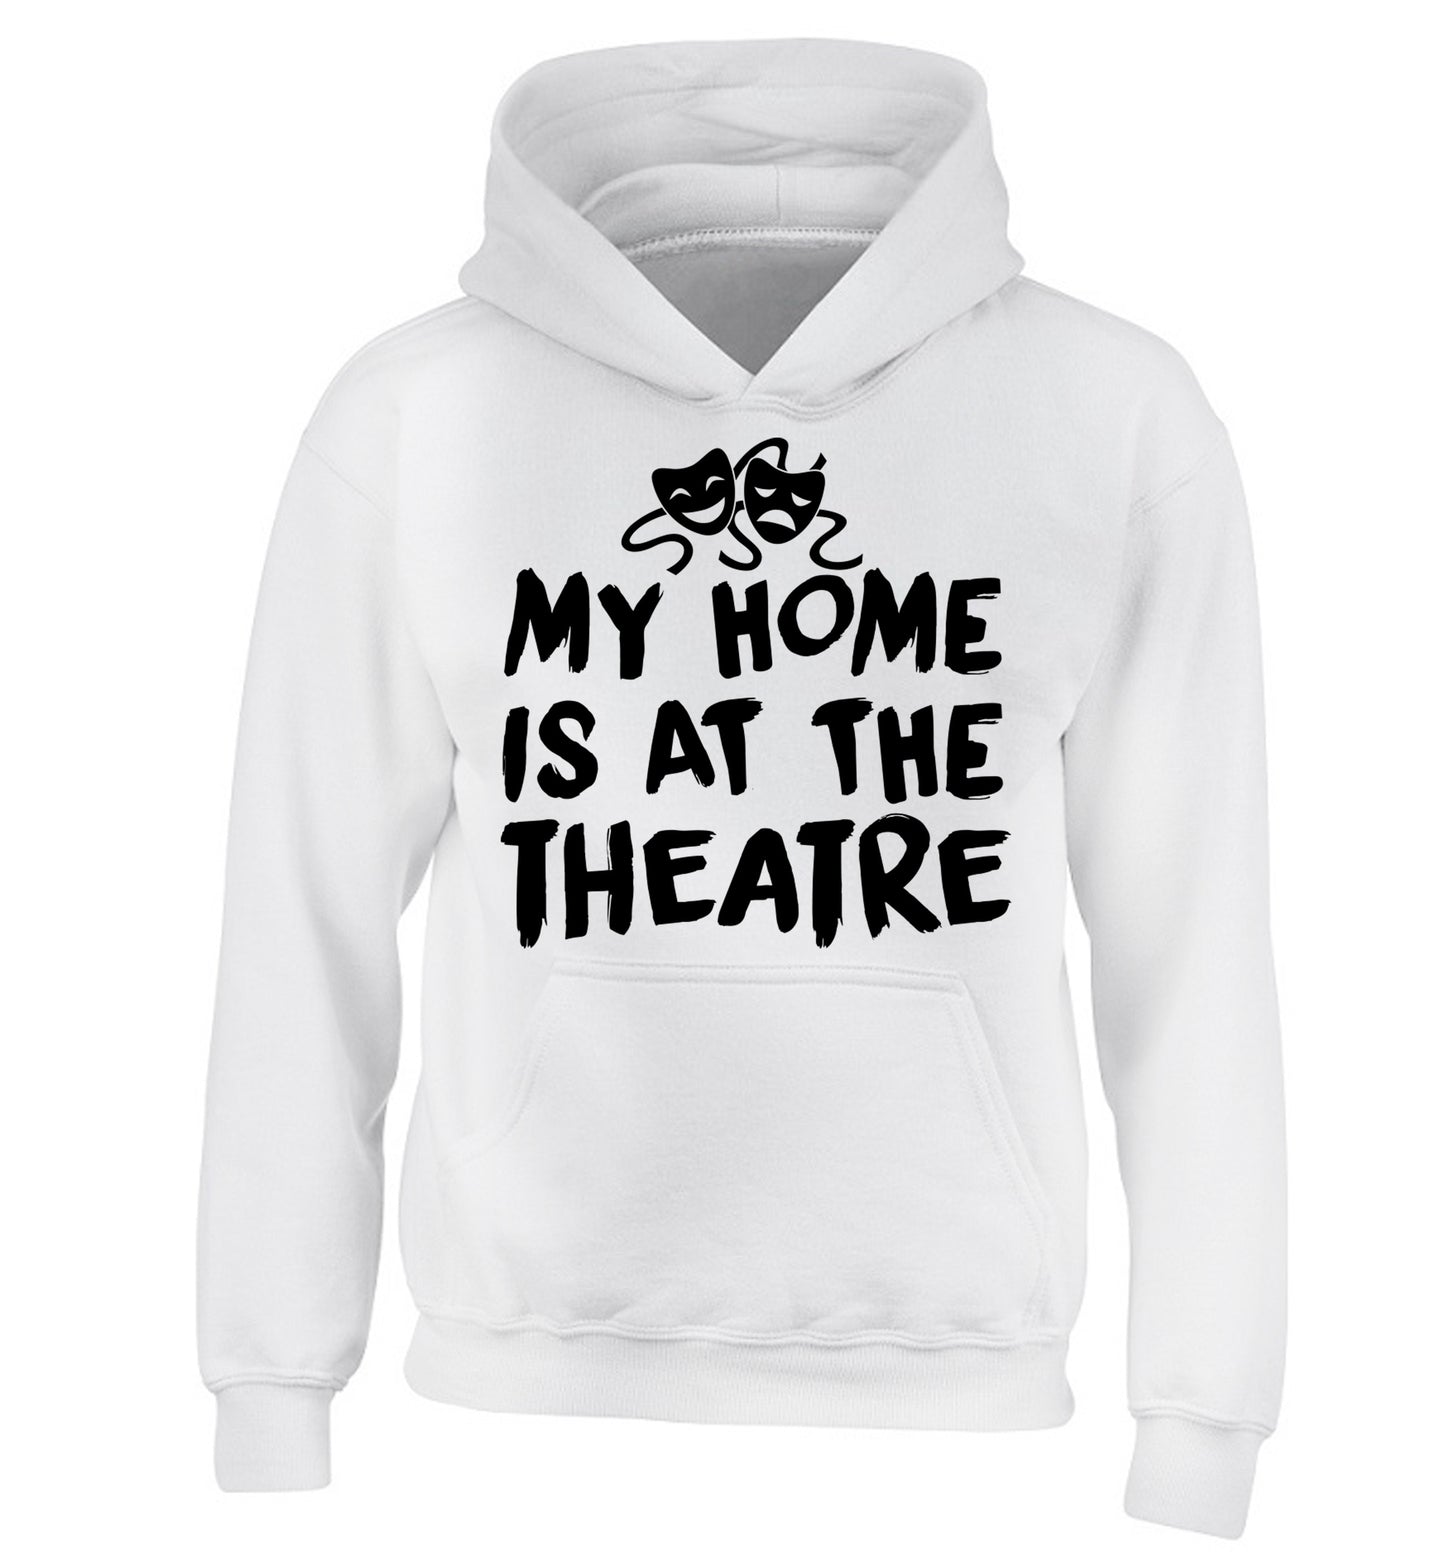 My home is at the theatre children's white hoodie 12-14 Years